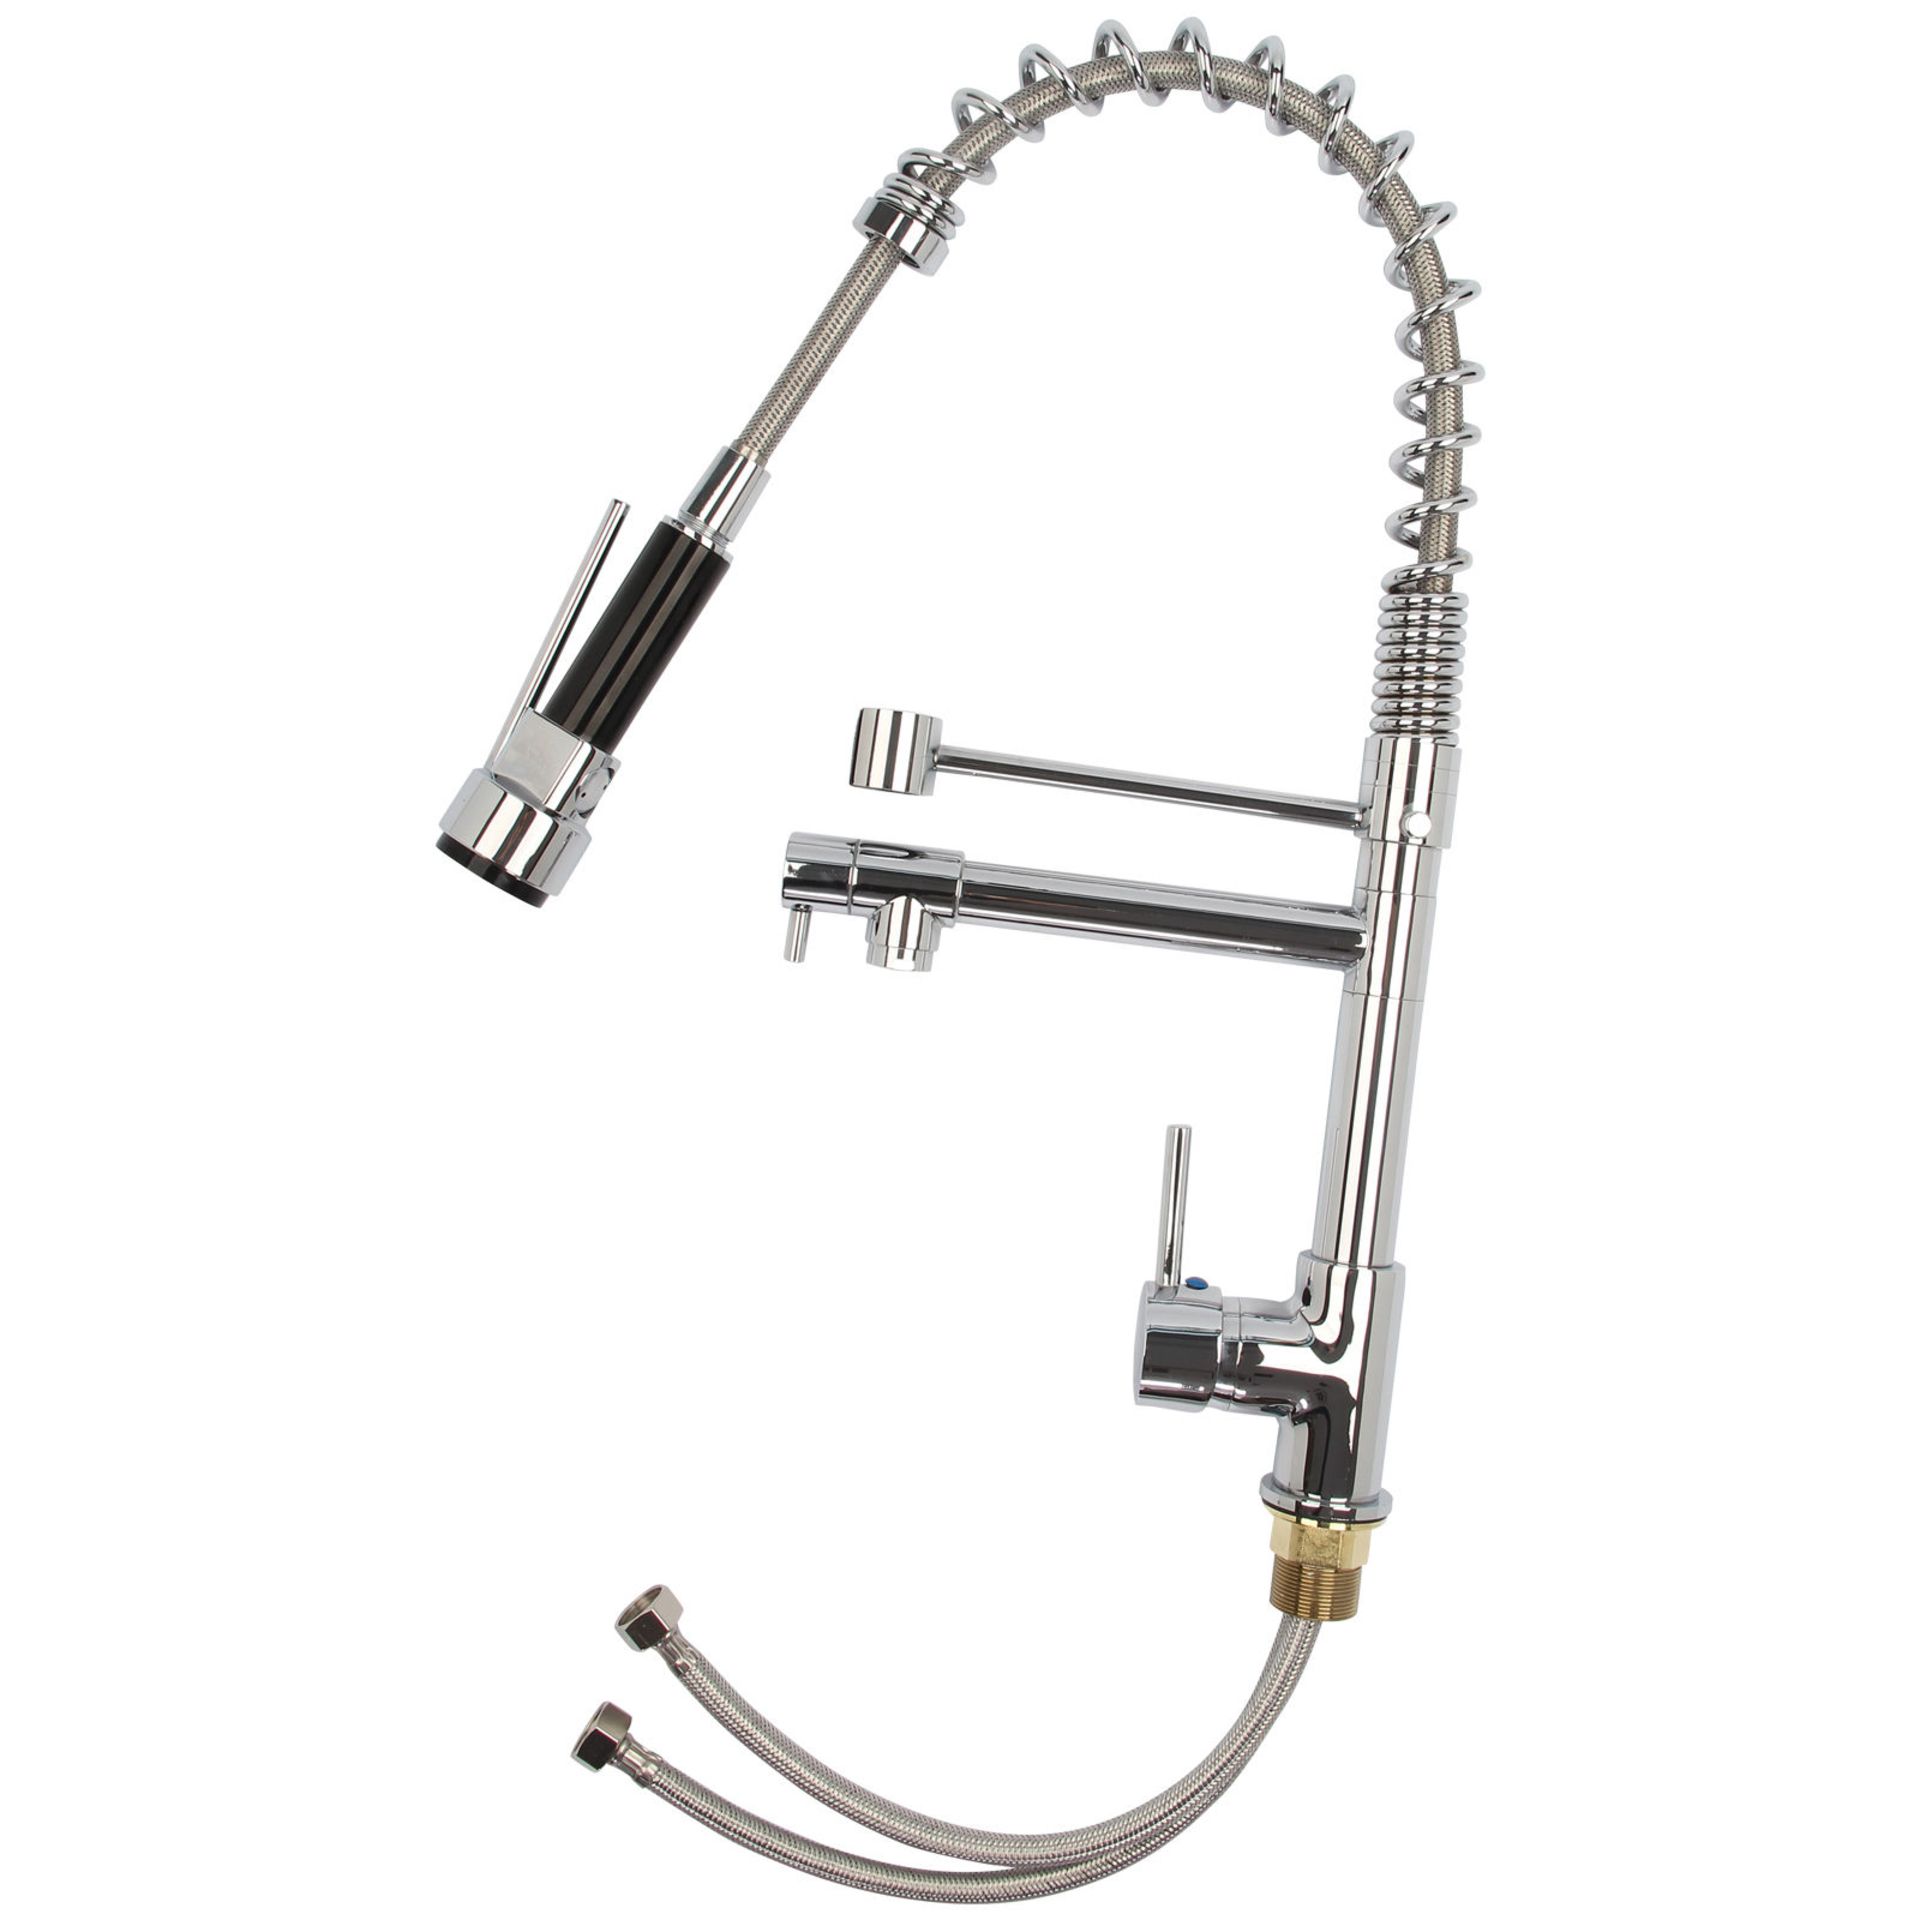 (MW191) Bentley Modern Monobloc Chrome Brass Pull Out Spray Mixer Tap. RRP £349.99. This tap is from - Bild 2 aus 6